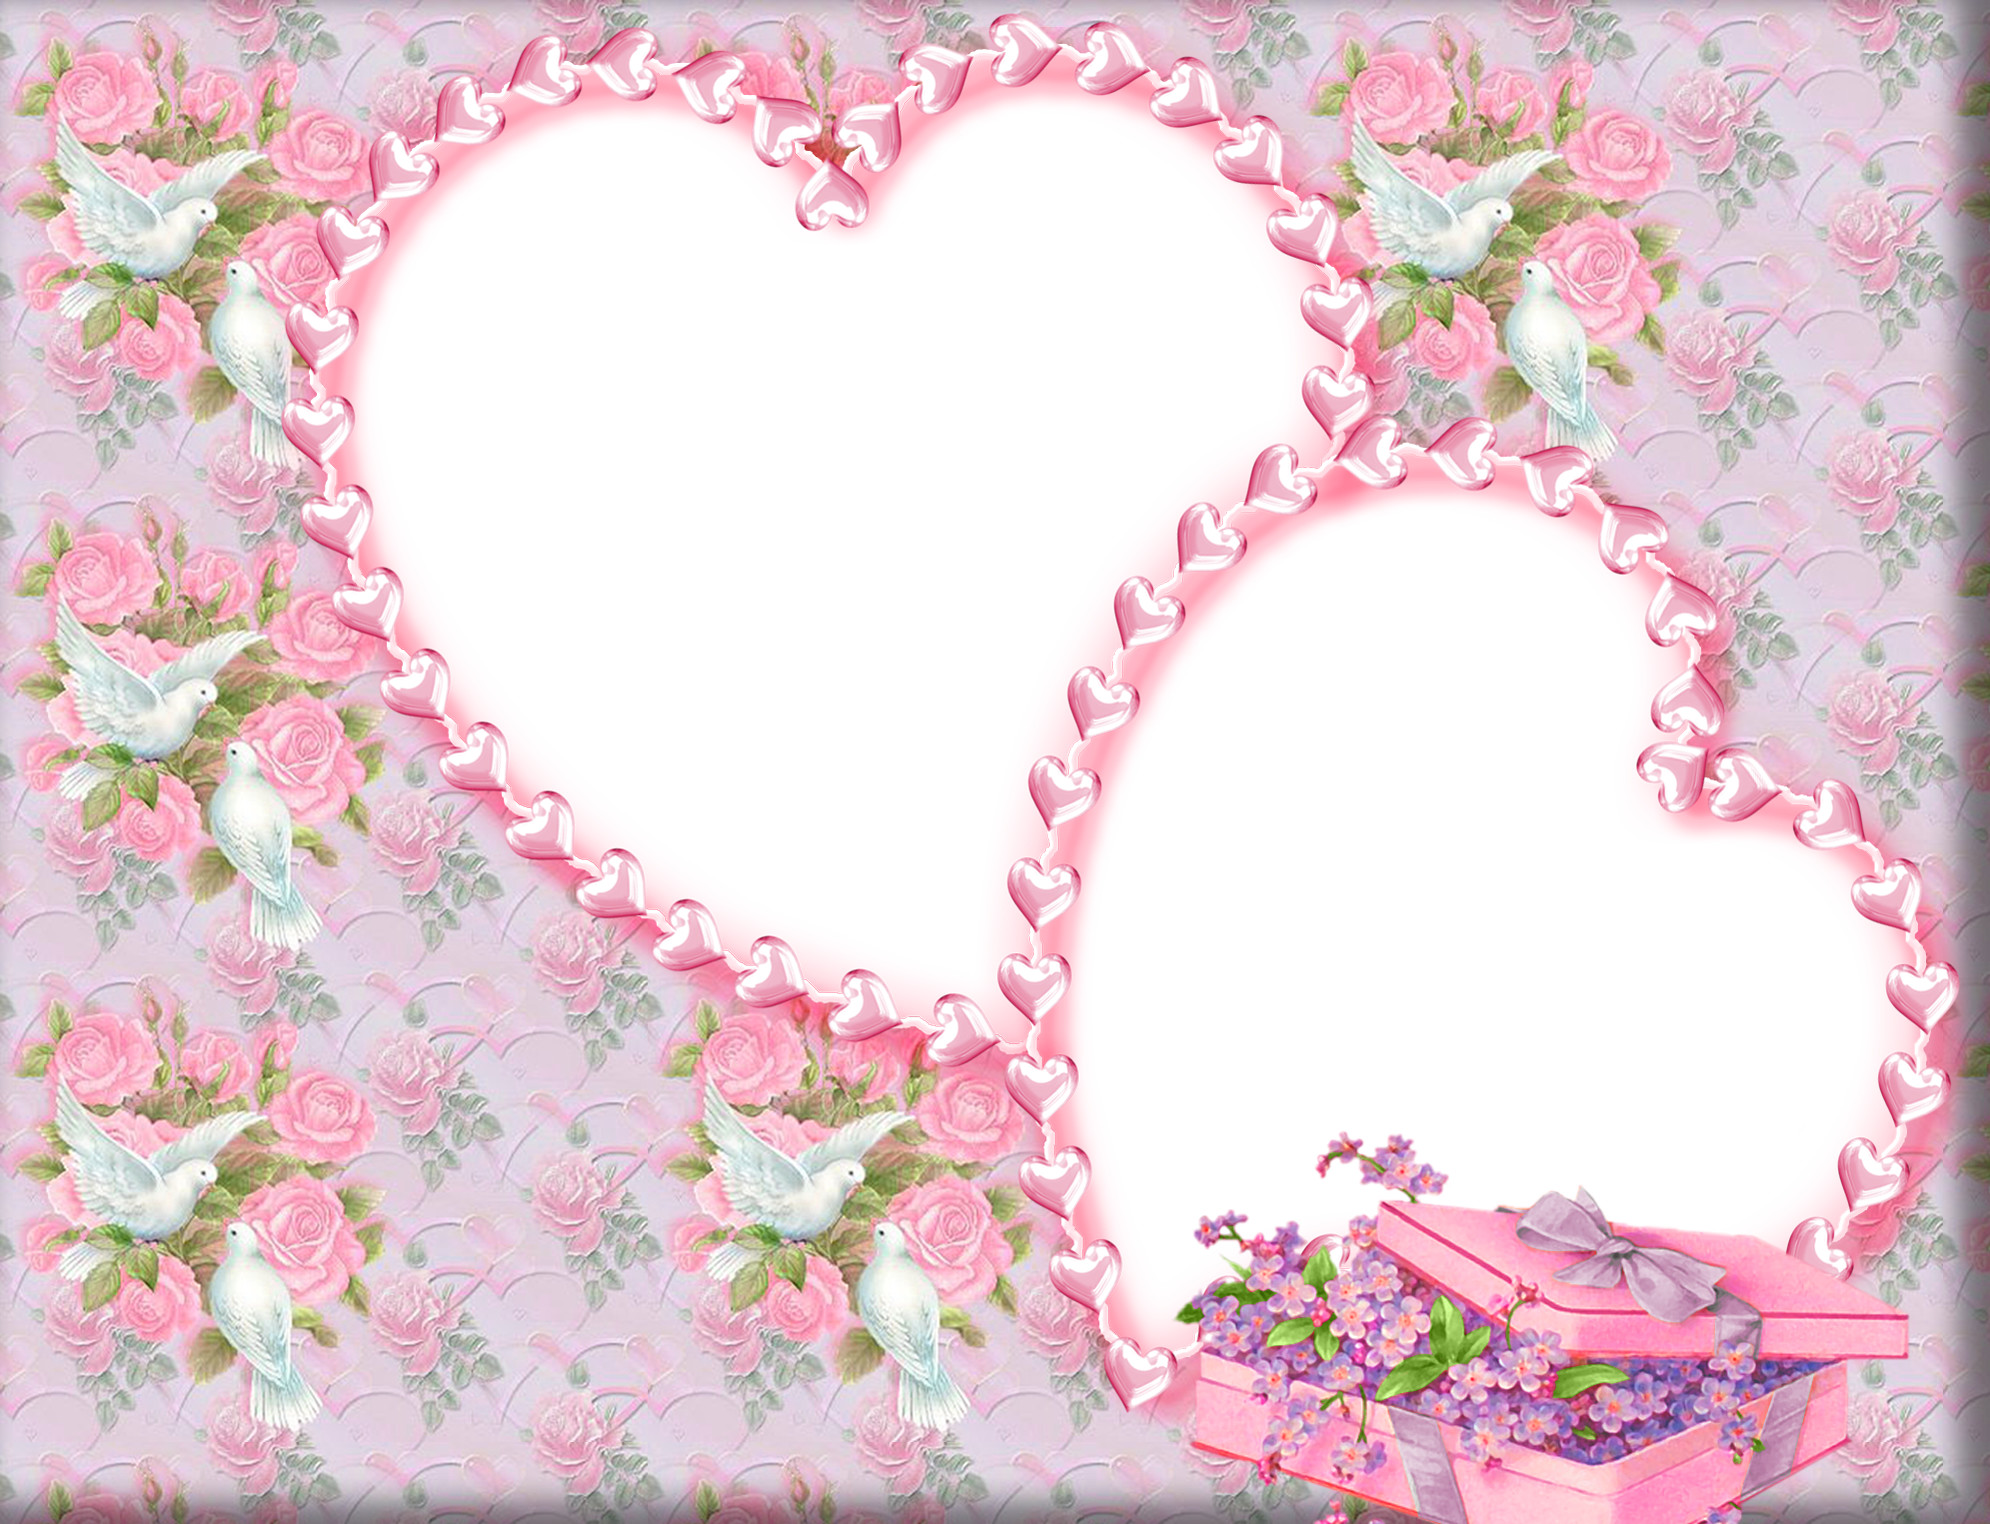 1990x1524 Cute pink backgrounds. Png photo frame with